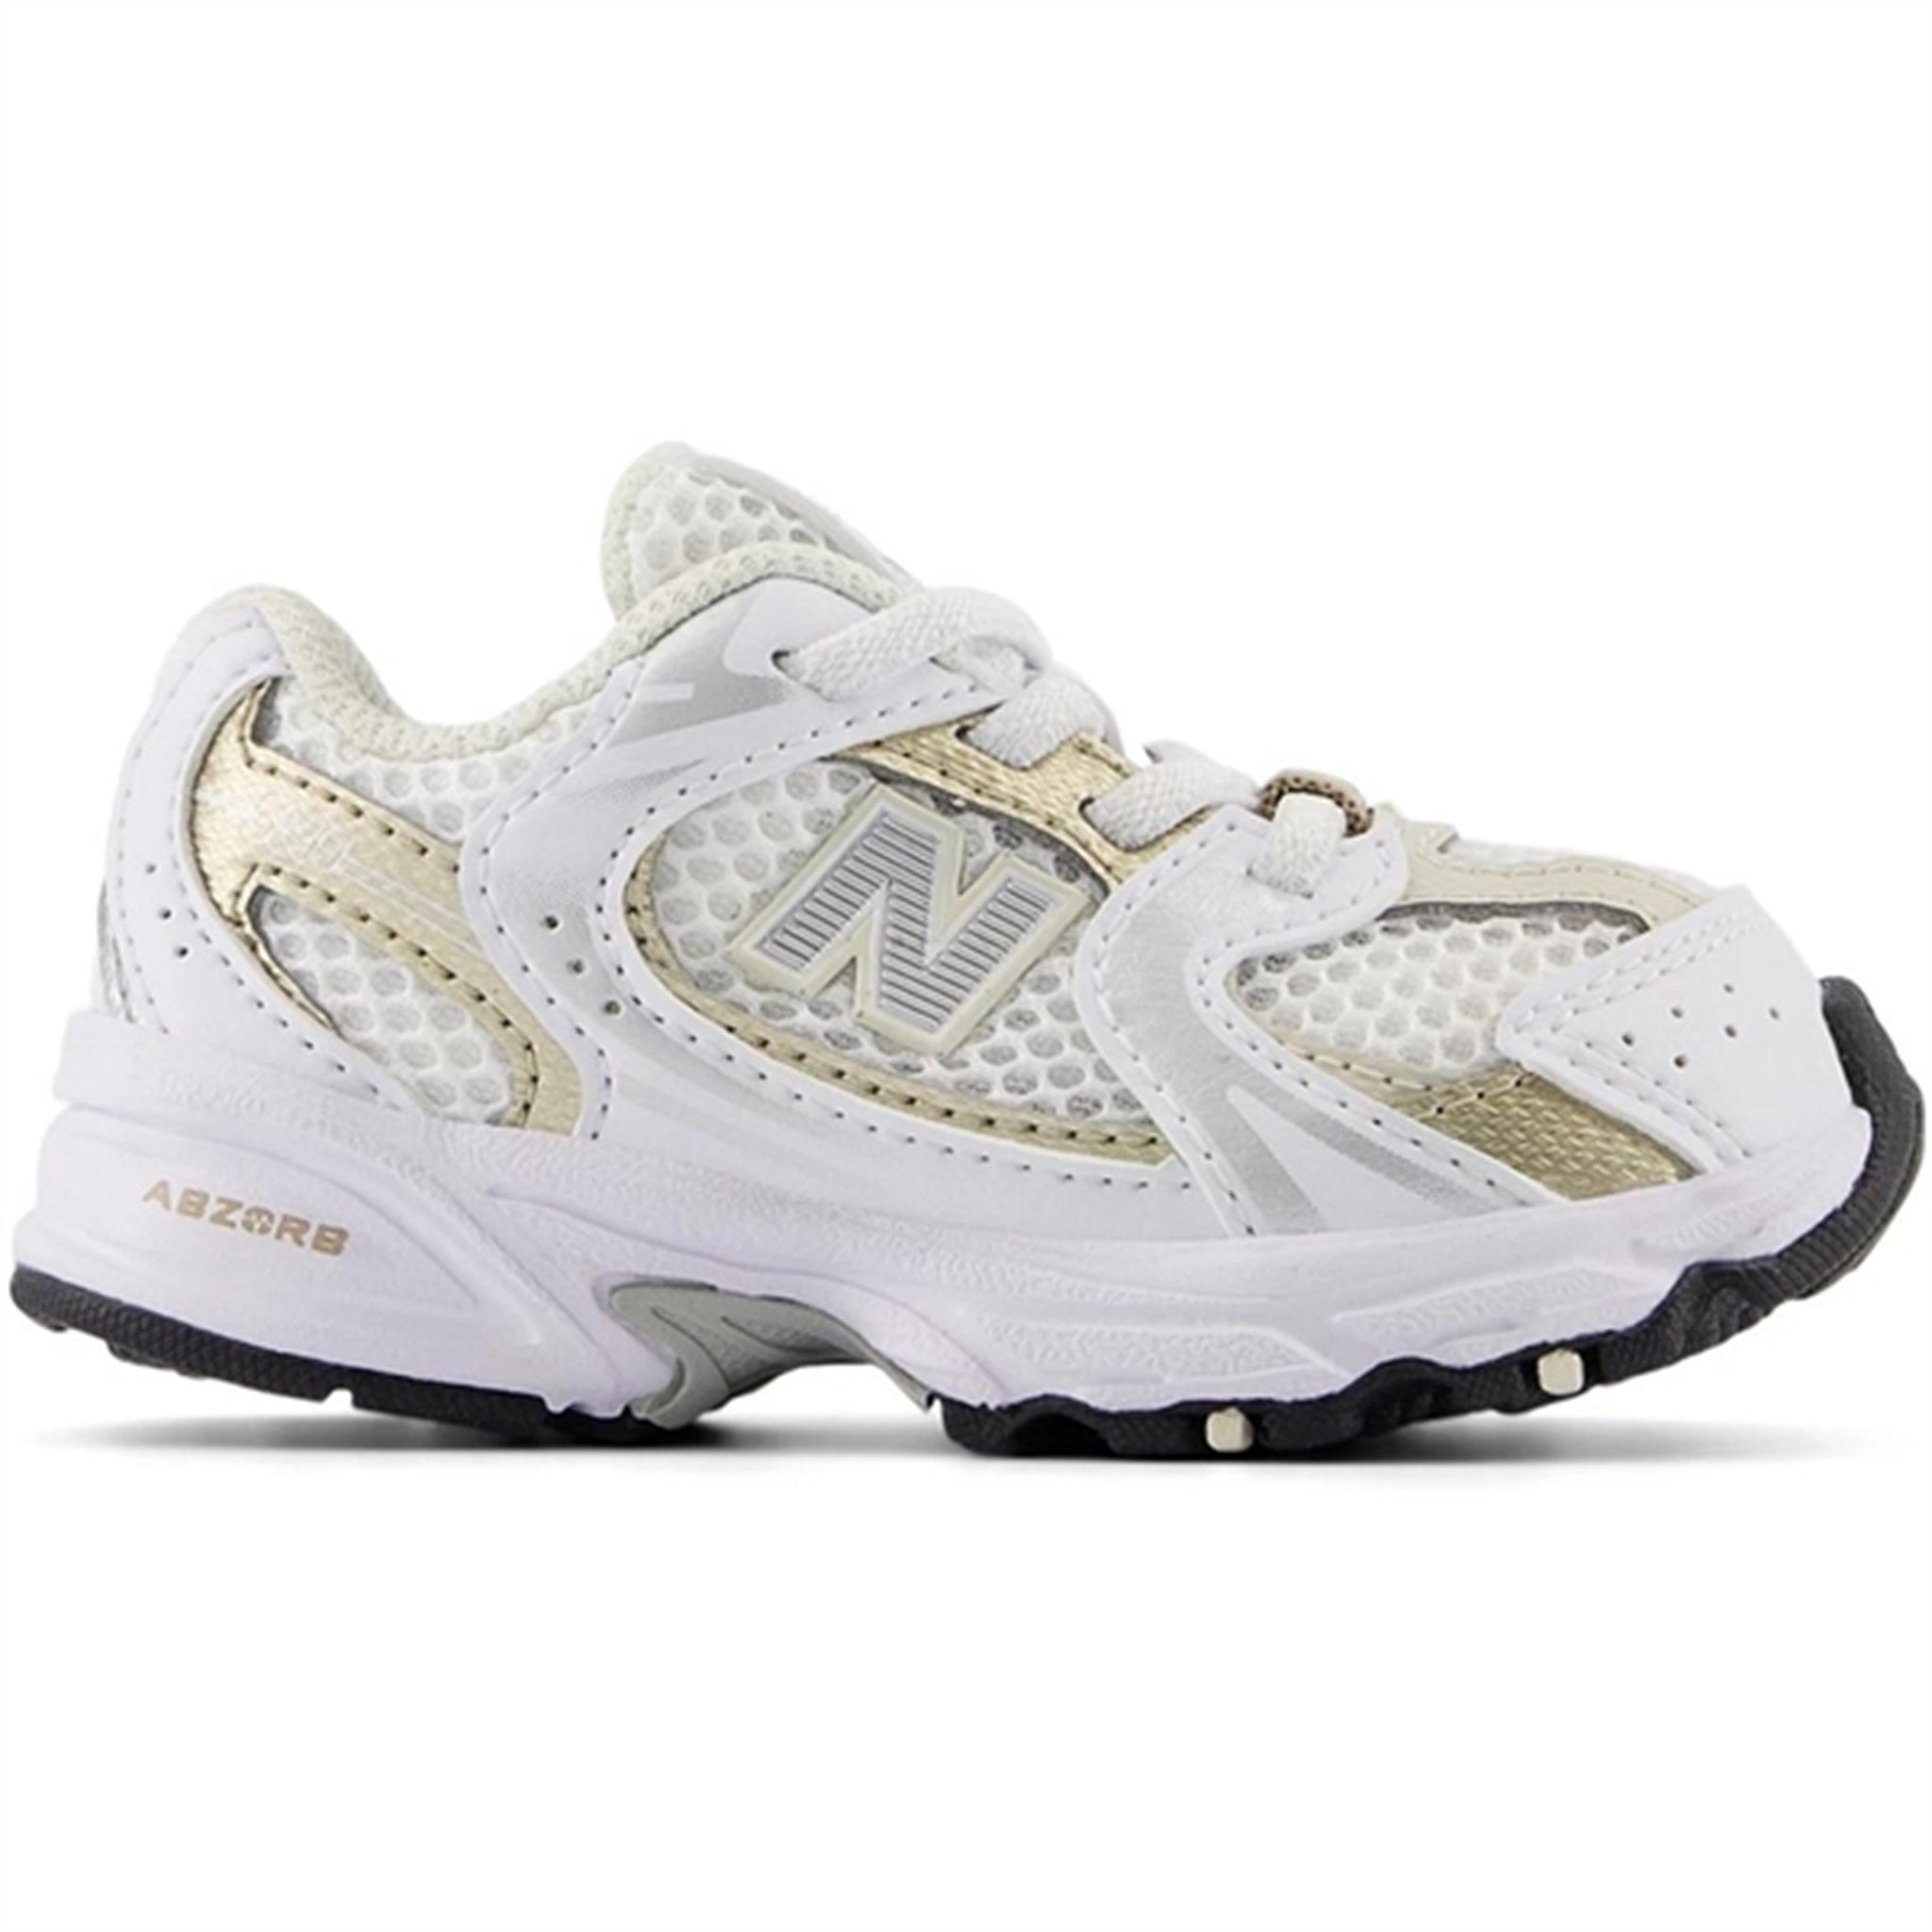 New Balance 530 Kids Bungee Lace Sneakers White